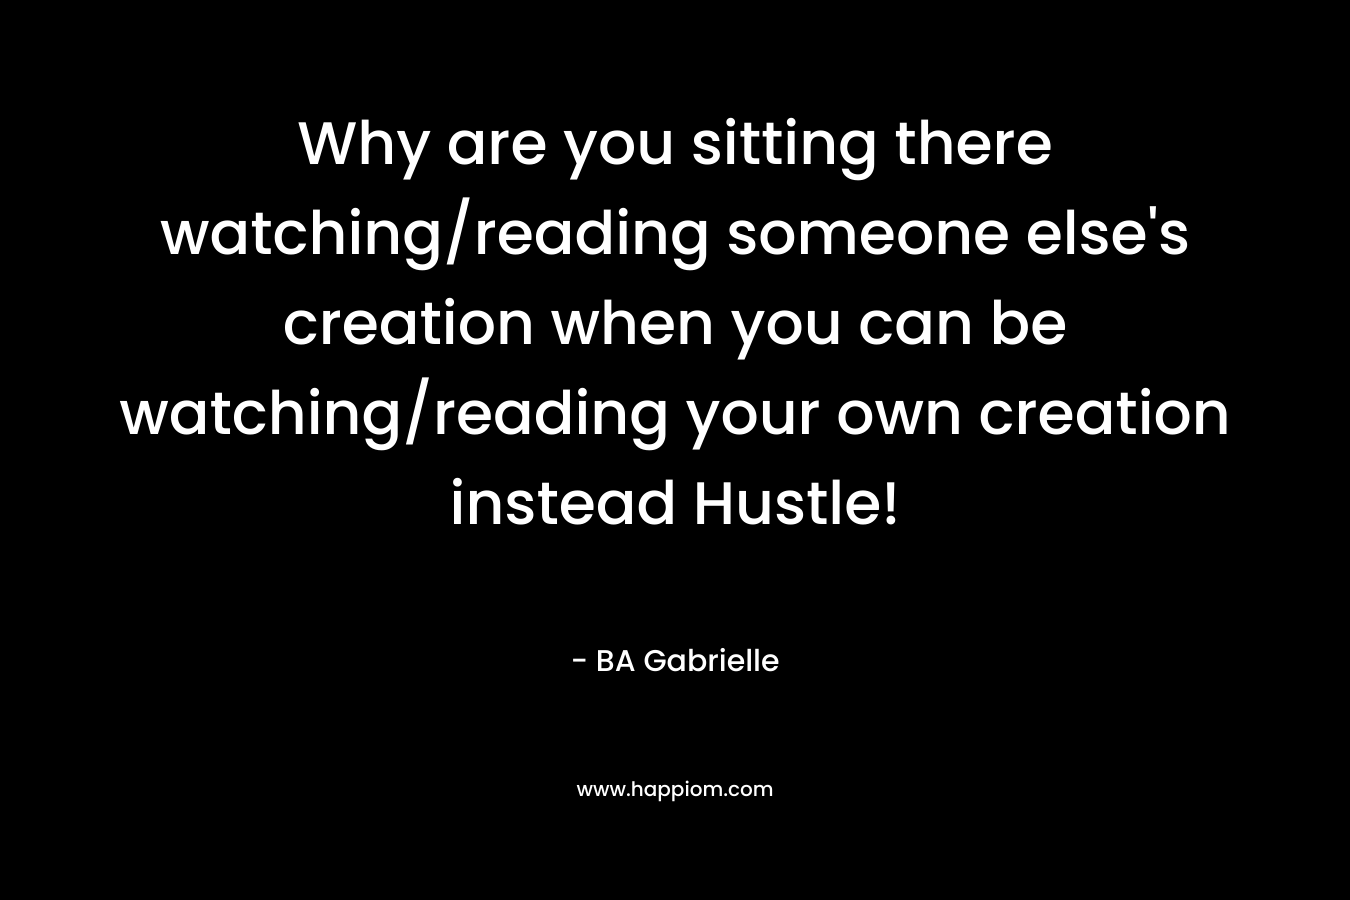 Why are you sitting there watching/reading someone else's creation when you can be watching/reading your own creation instead Hustle!